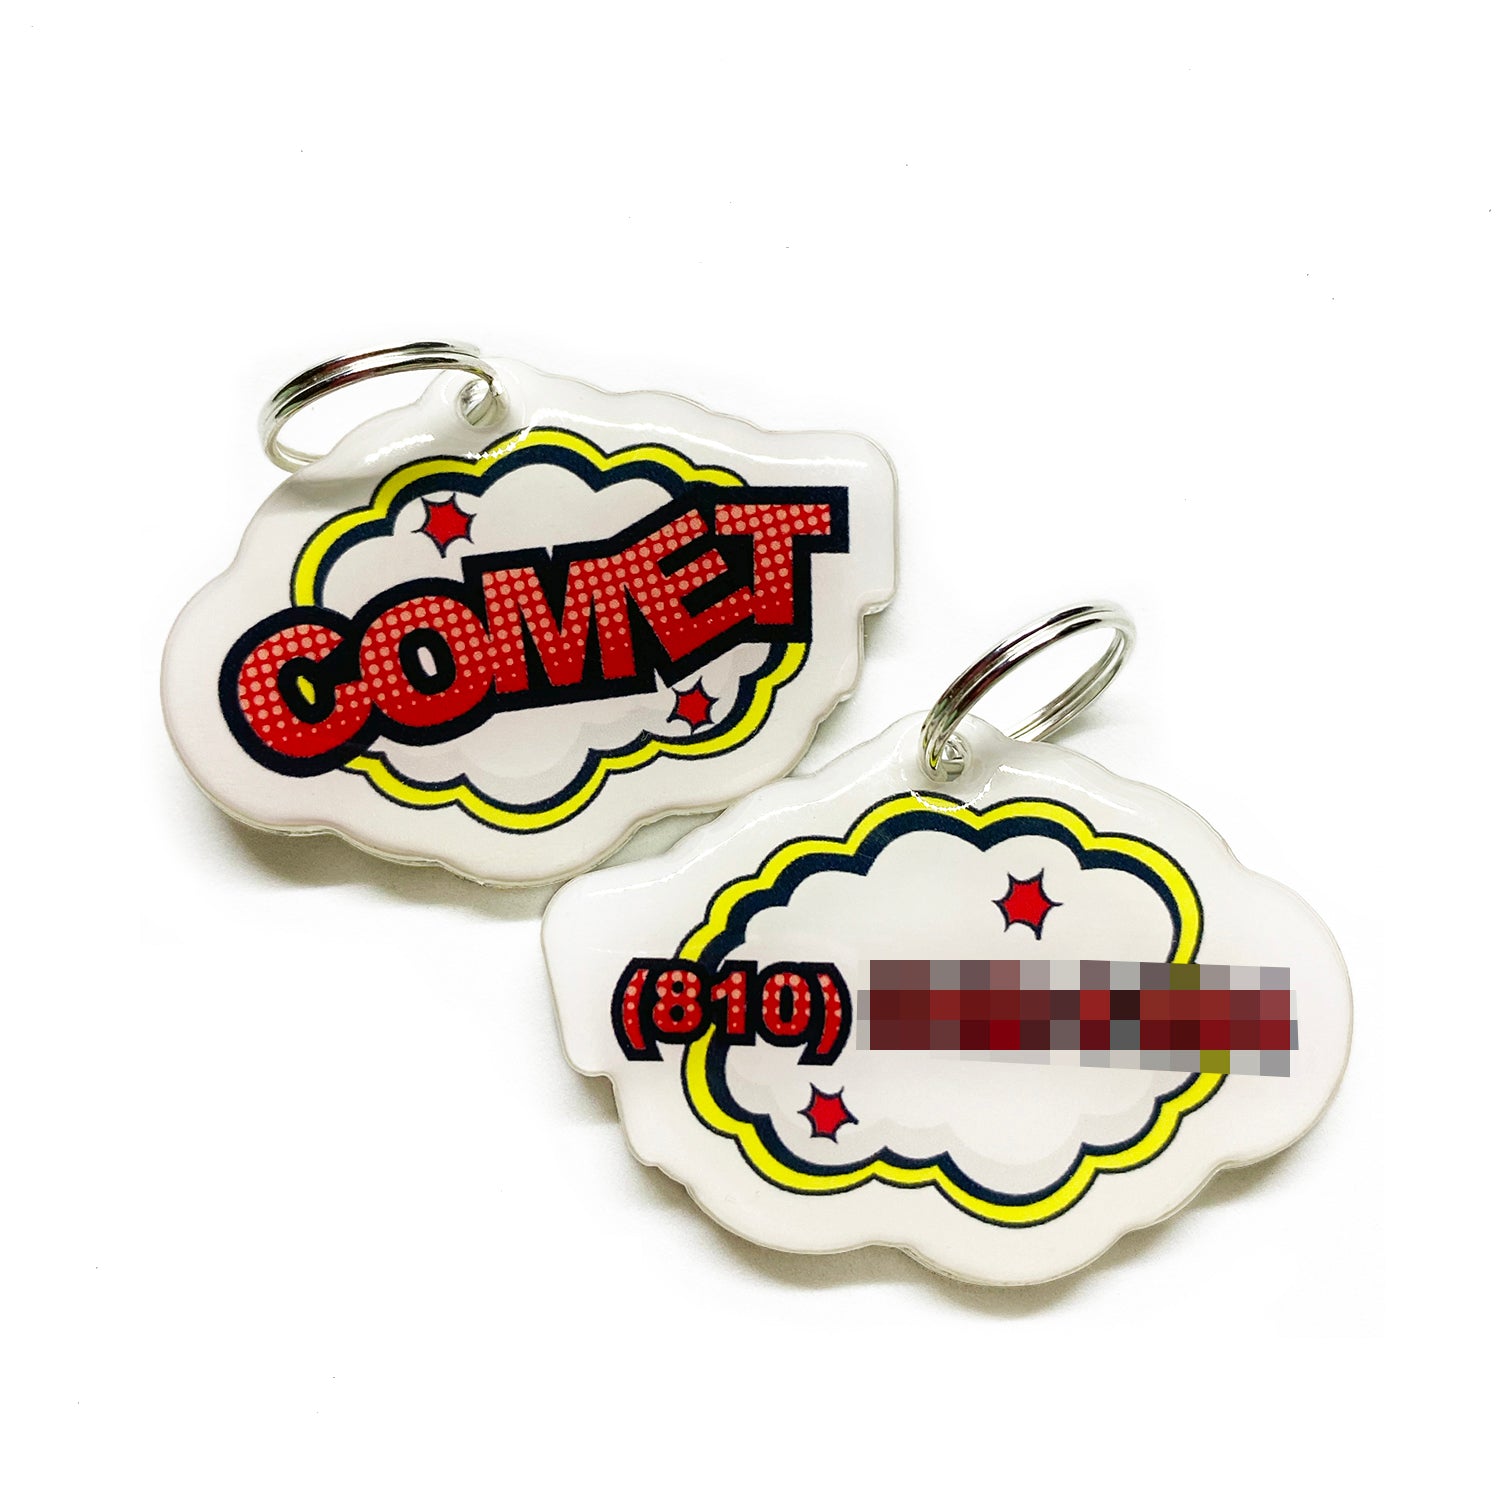 Red Speech Bubble - 2x Tags Dog Name Tags by Bashtags